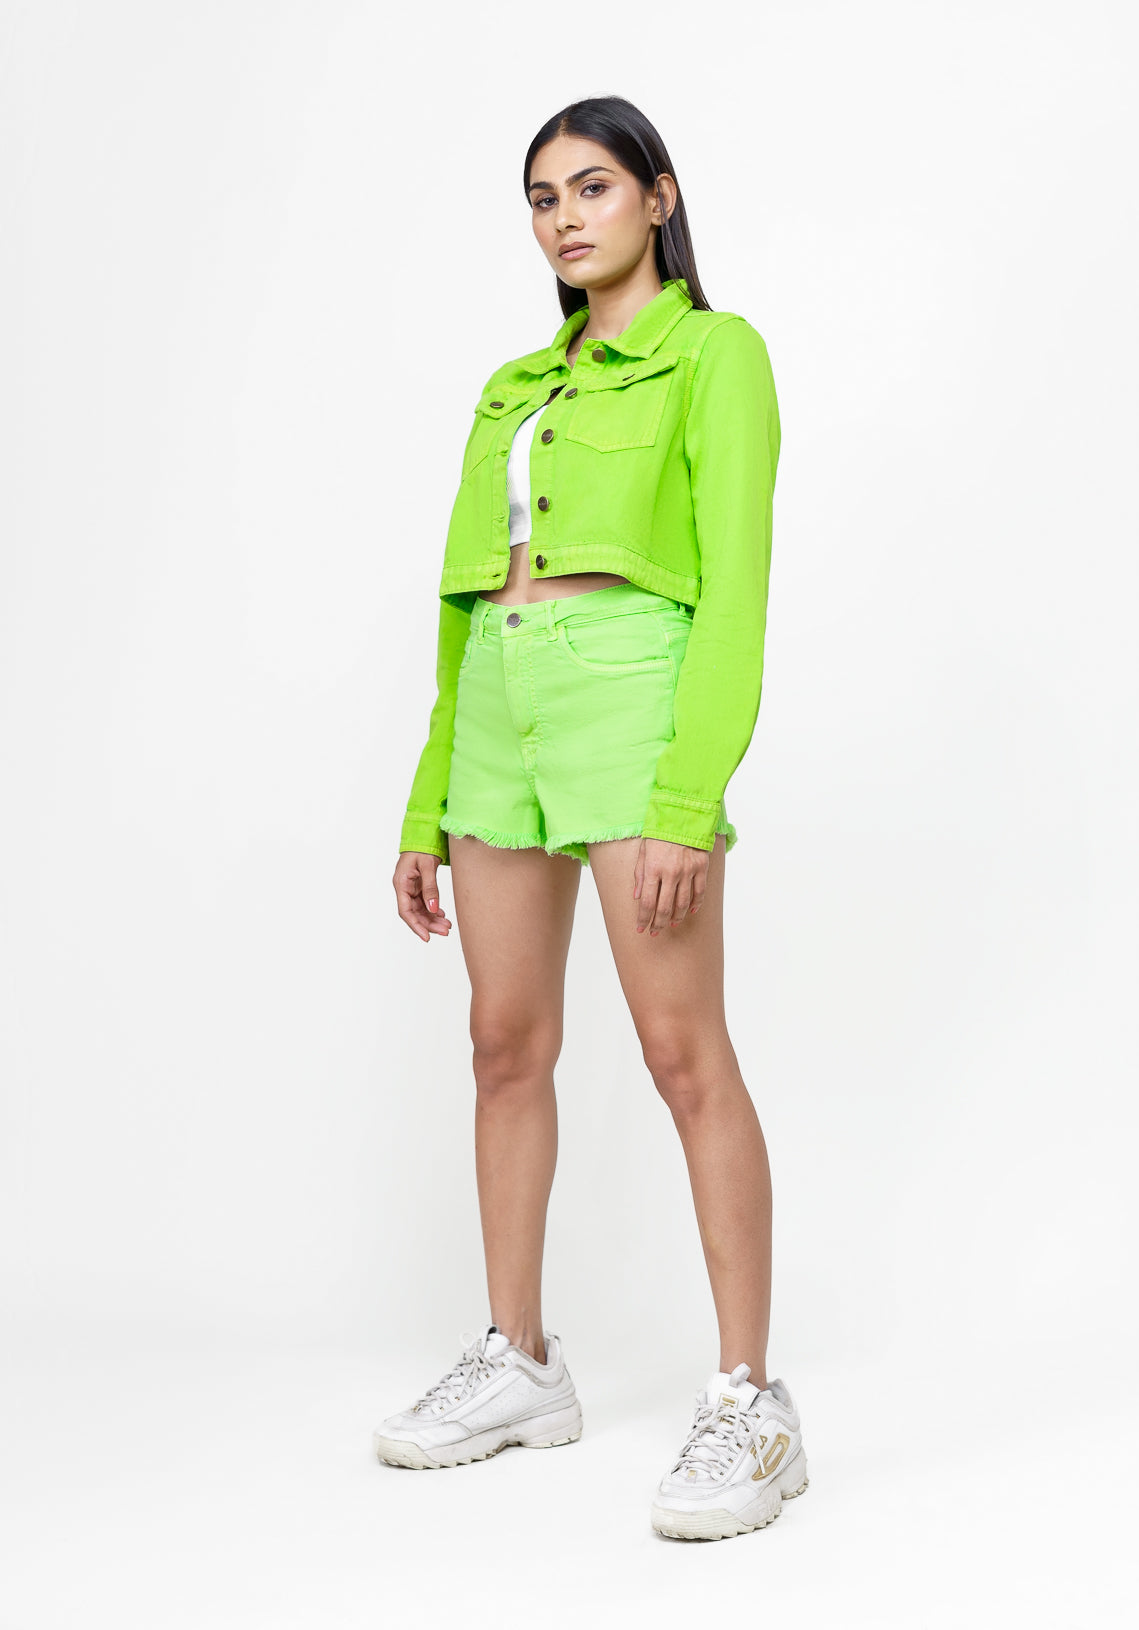 NEON GREEN CROPPED JACKET